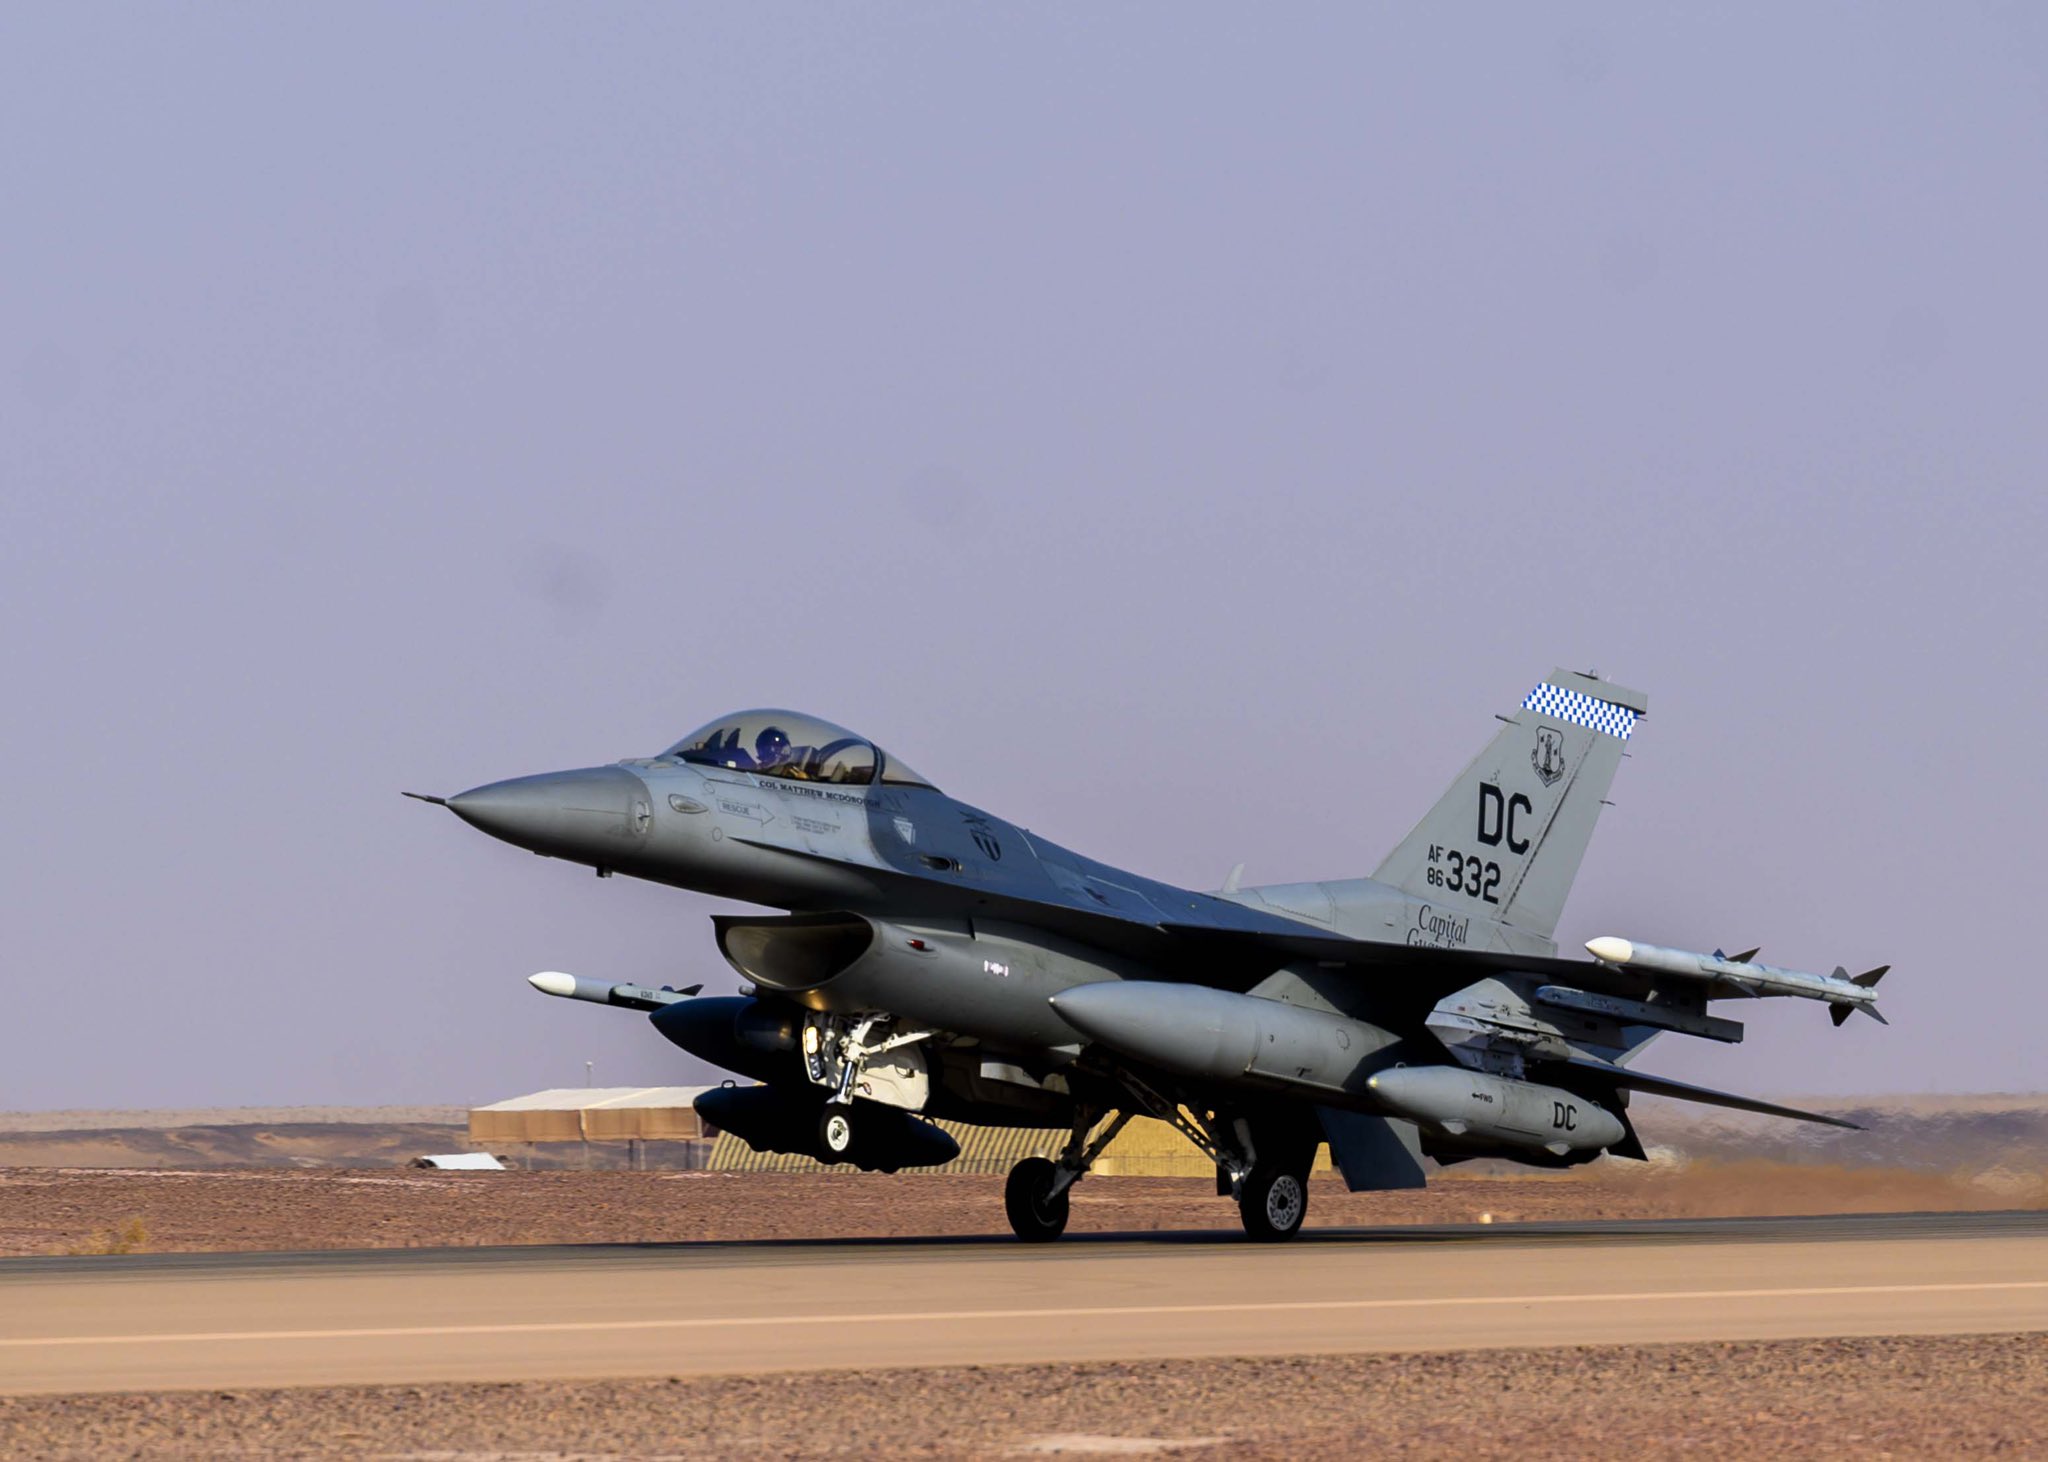 US District of Columbia Air National Guard F-16 Fighters Arrive in Kingdom of Saudi Arabia